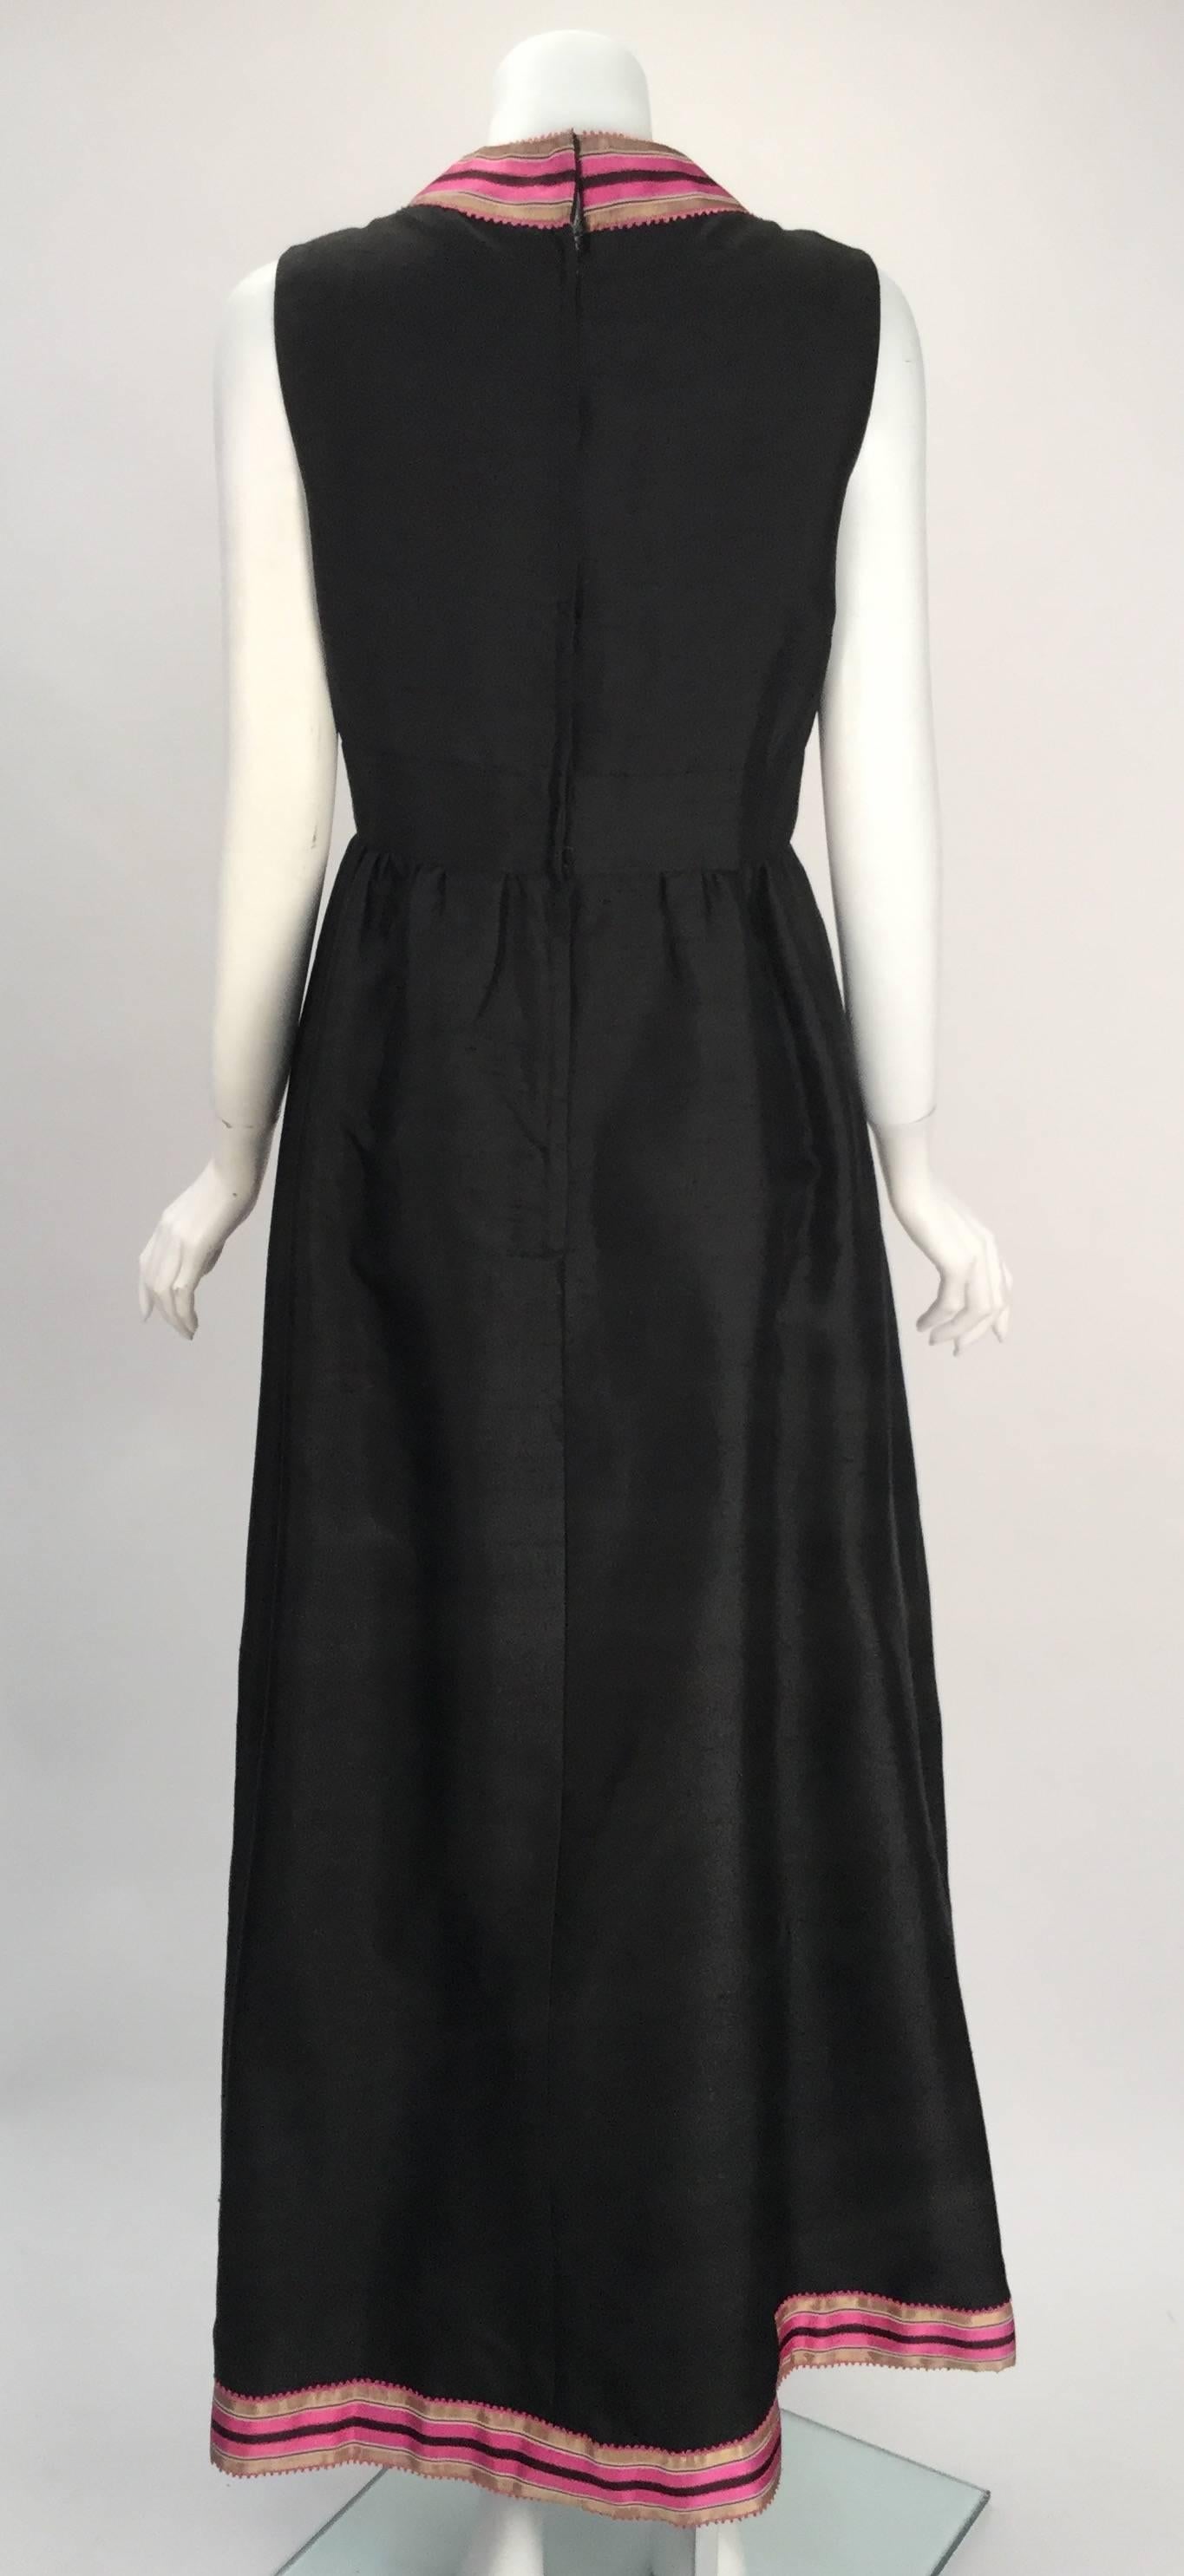 Women's 1960s Kent Black and Pink Maxi Dress with Bow